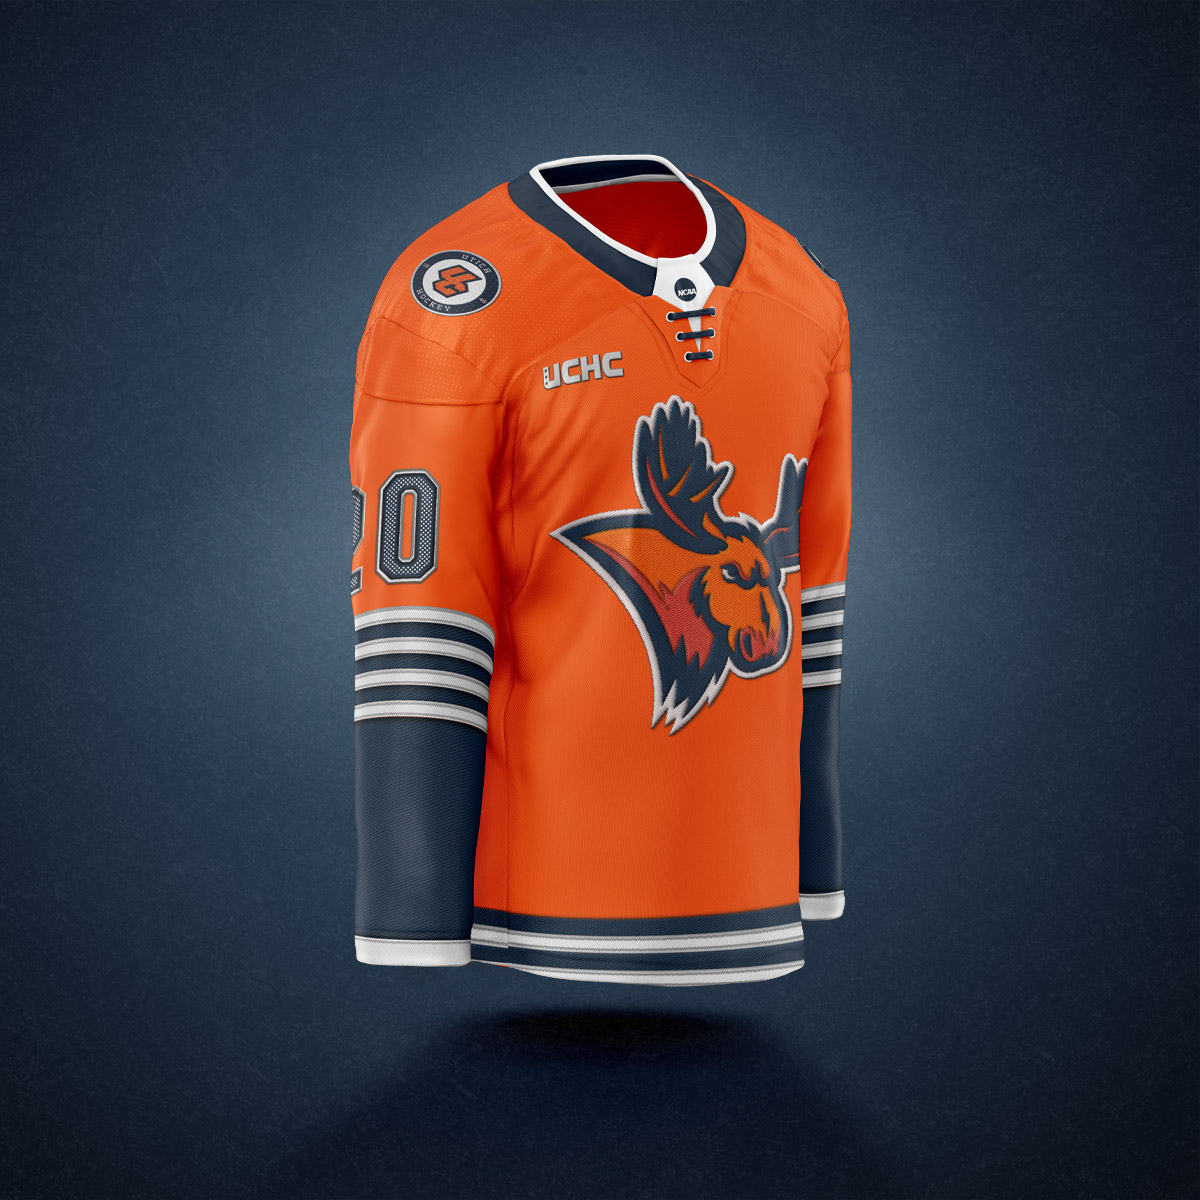 NYR jersey concept front view